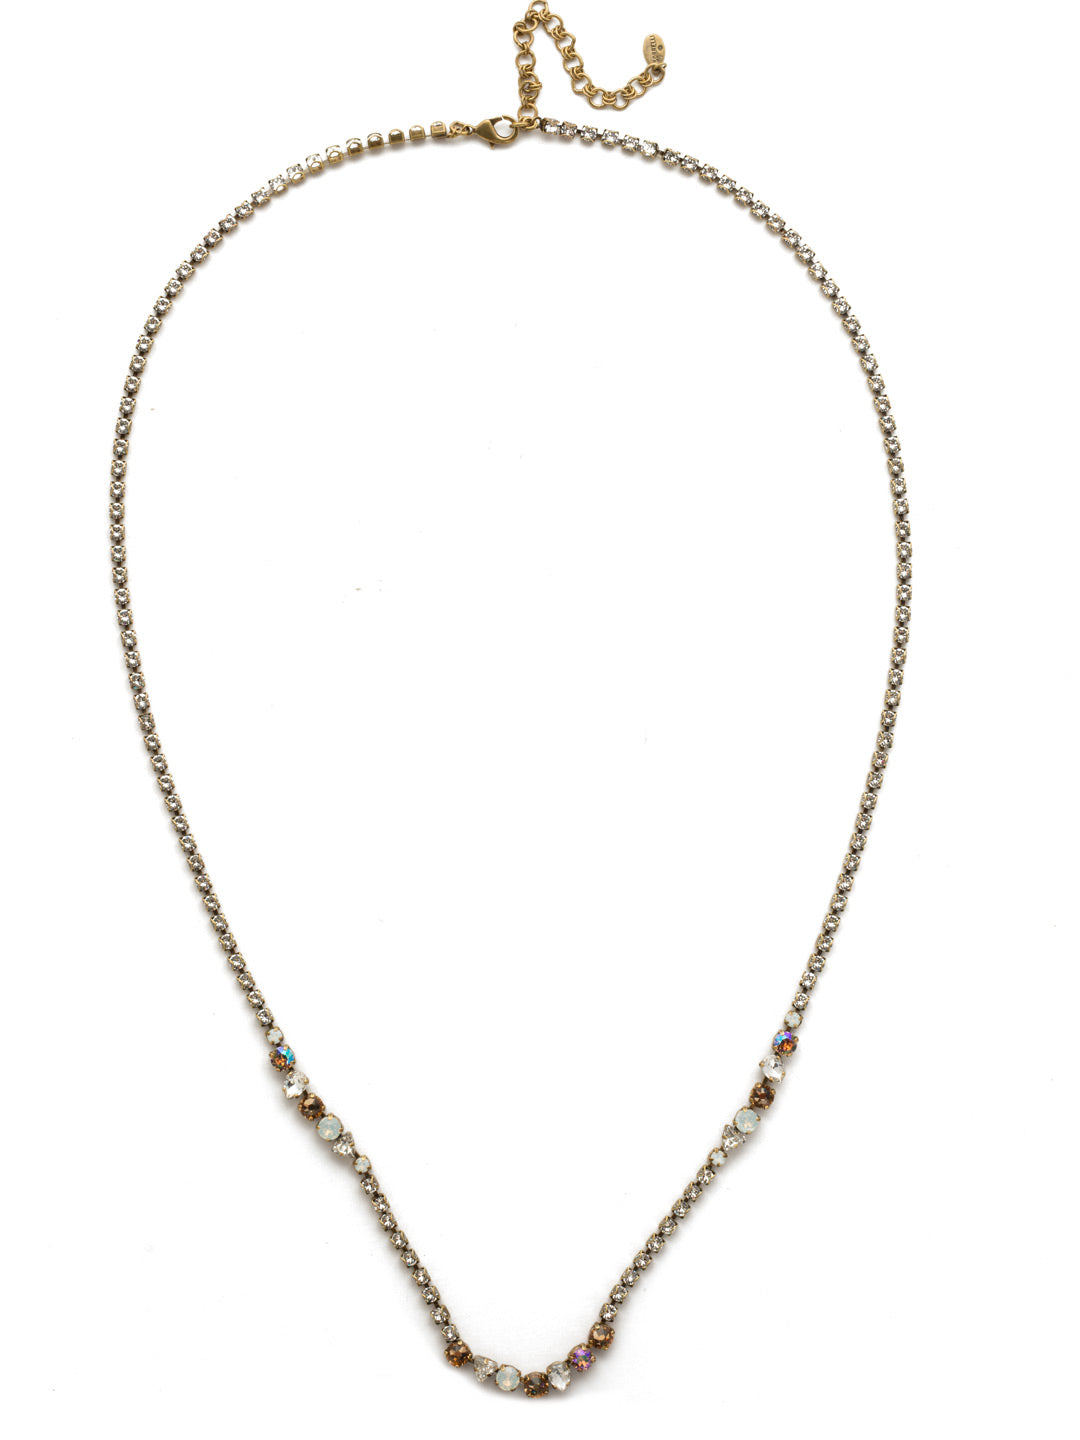 Aviva Long Necklace - NEK24AGROB - Grab this long strand classic necklace when you're looking to layer on some serious sparkle. Completely lined in crystal, it's a show-stopper. From Sorrelli's Rocky Beach collection in our Antique Gold-tone finish.